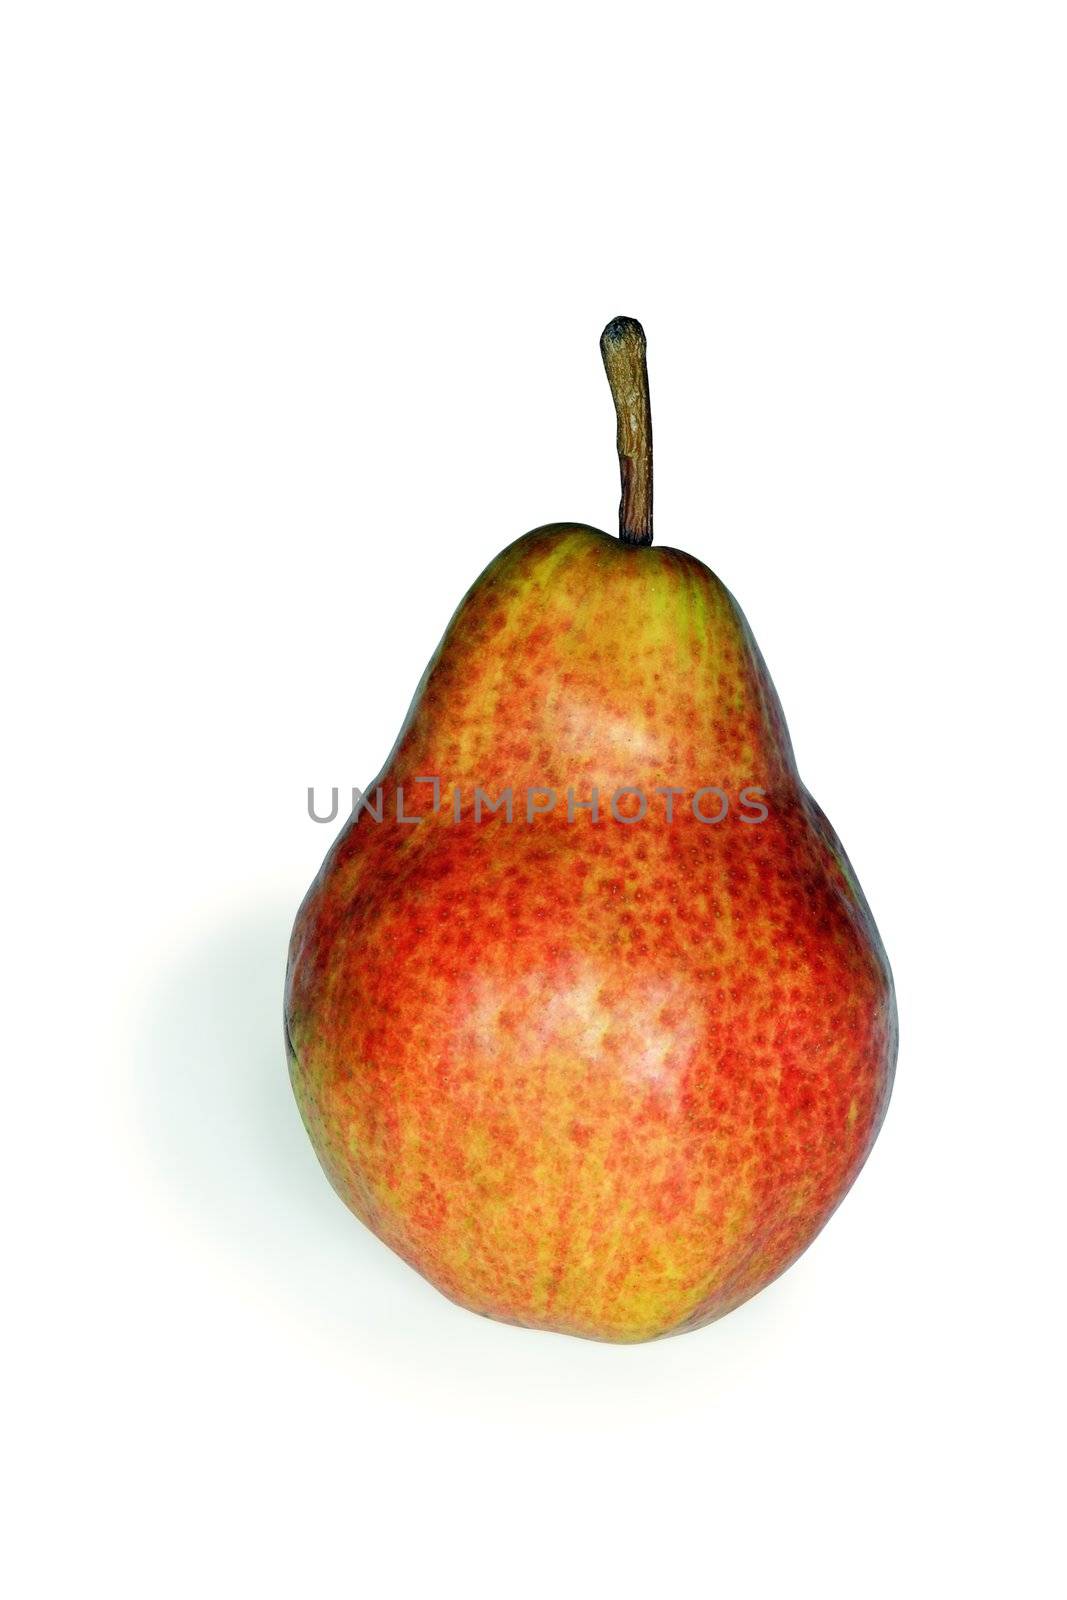 An image of a red ripe pear on white background